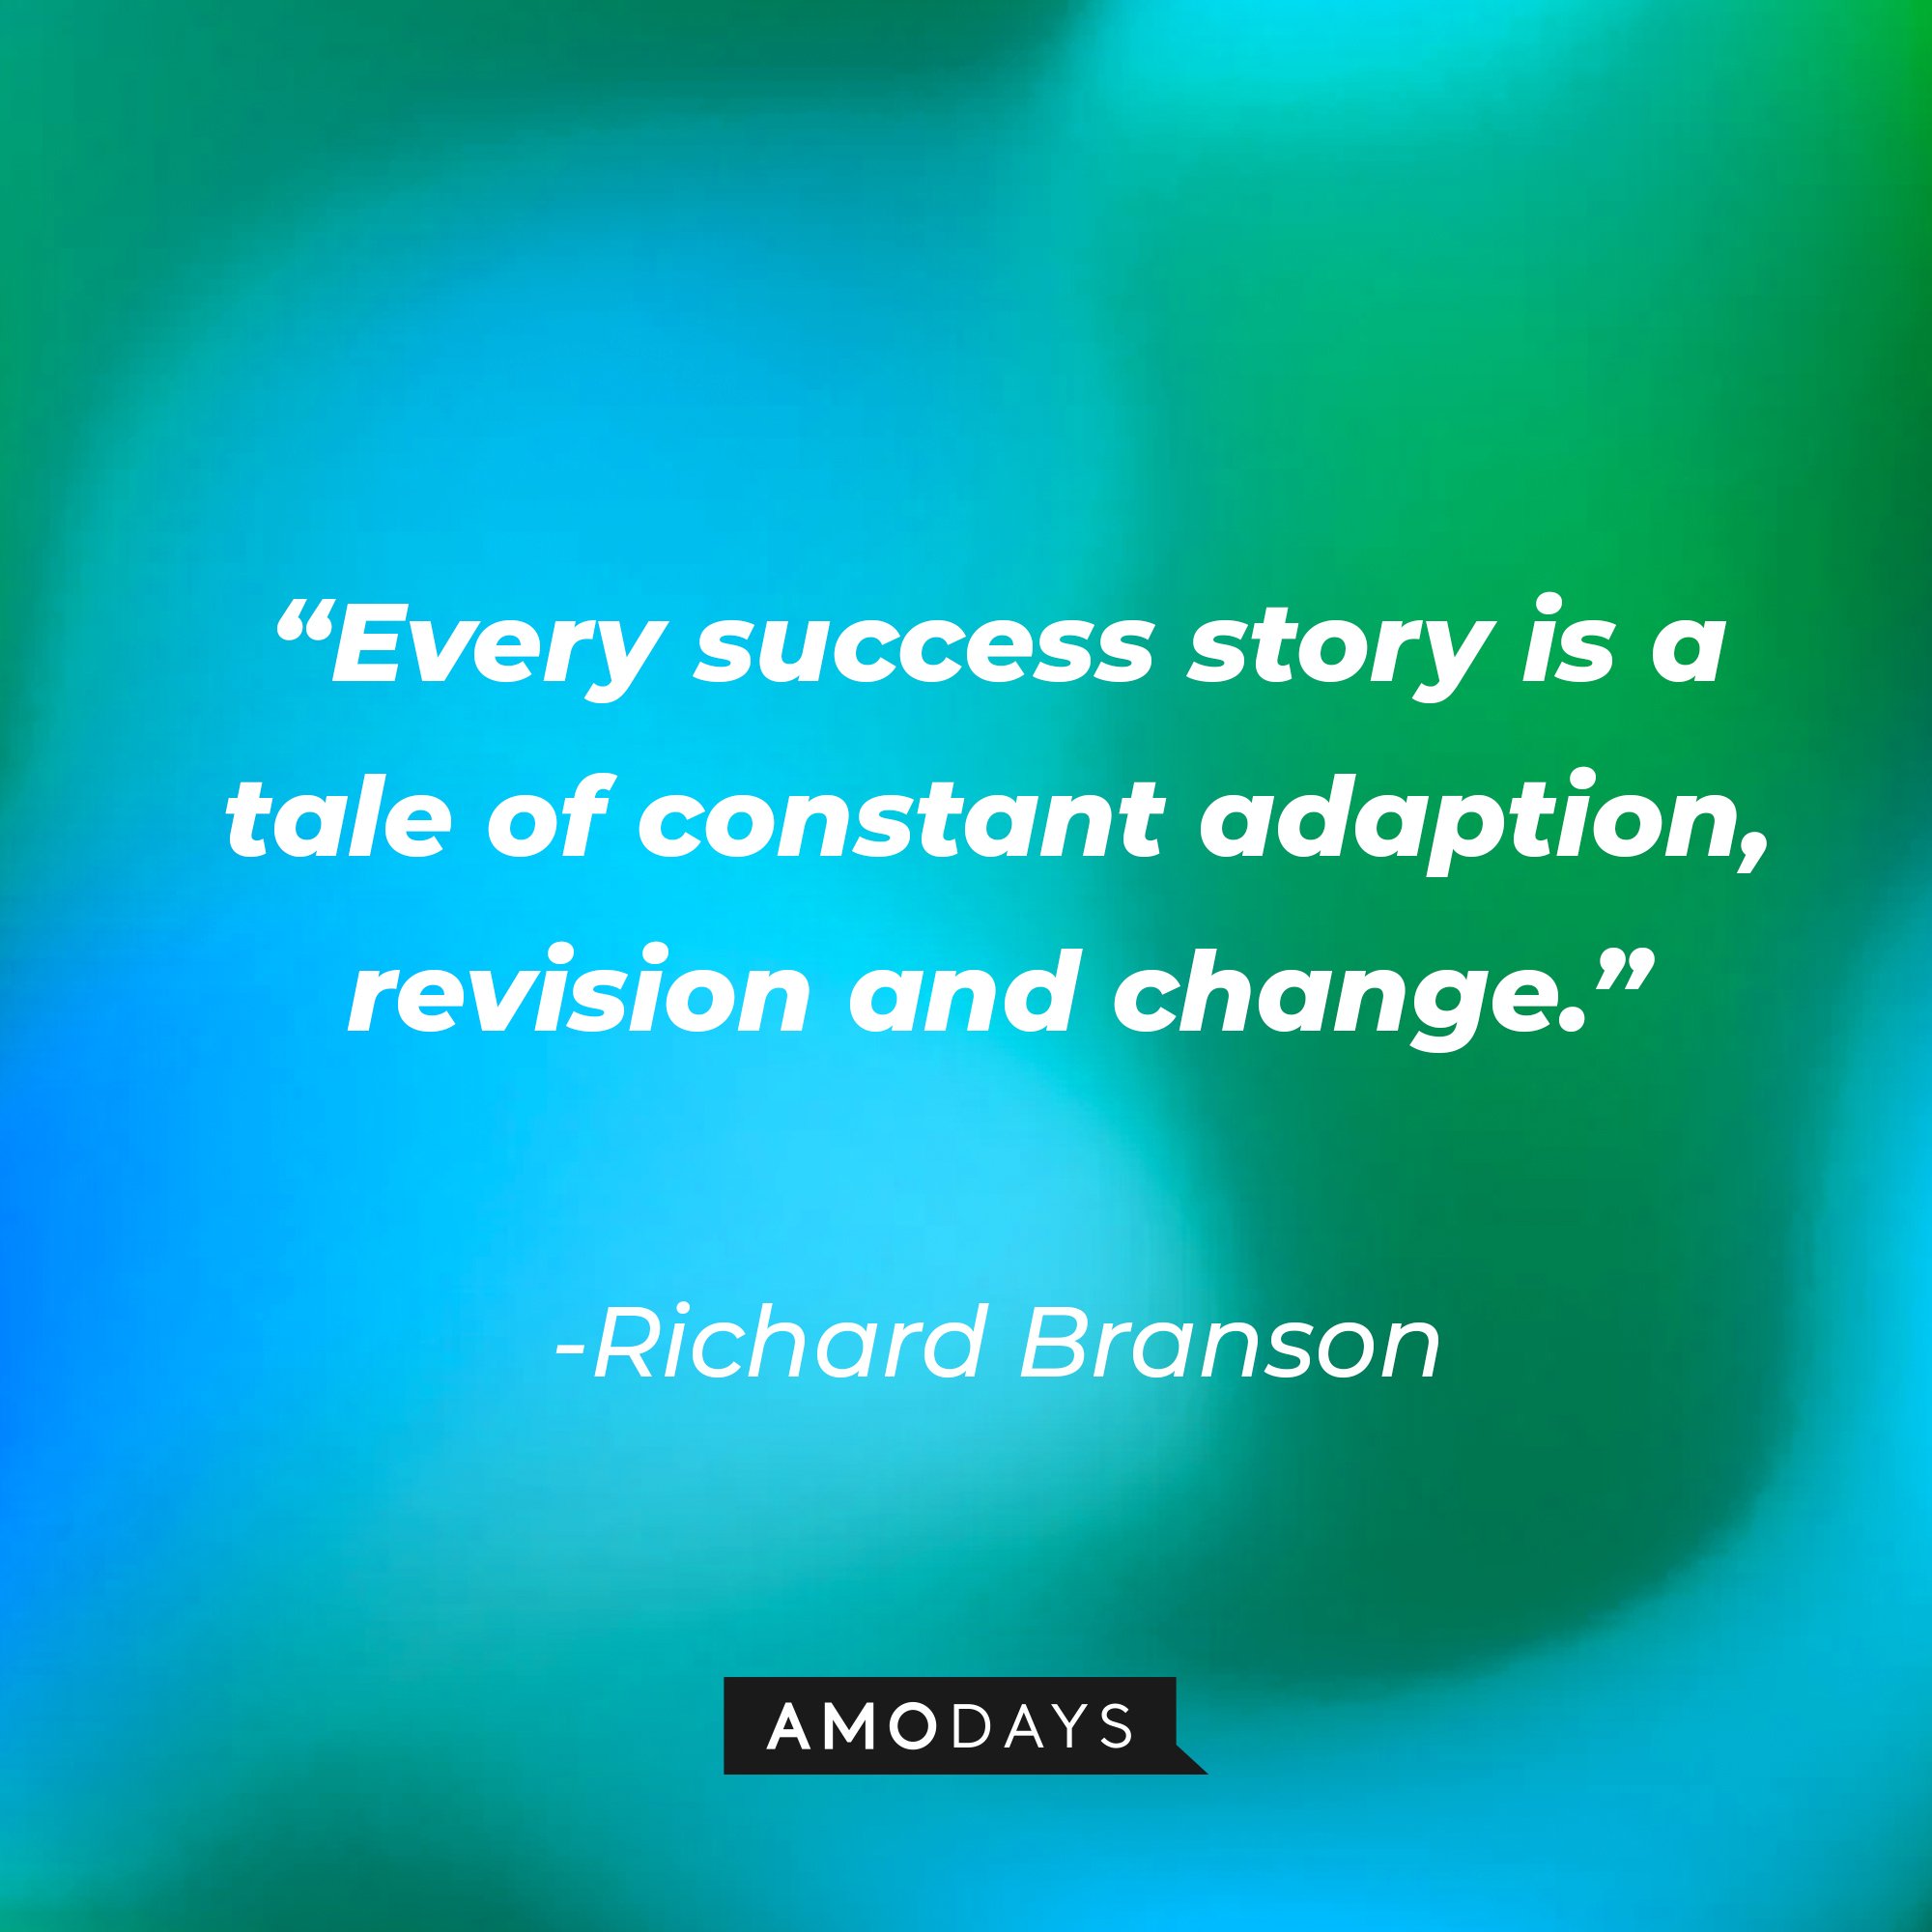 Richard Branson's quote: "Every success story is a tale of constant adaption, revision and change." | Image: AmoDays